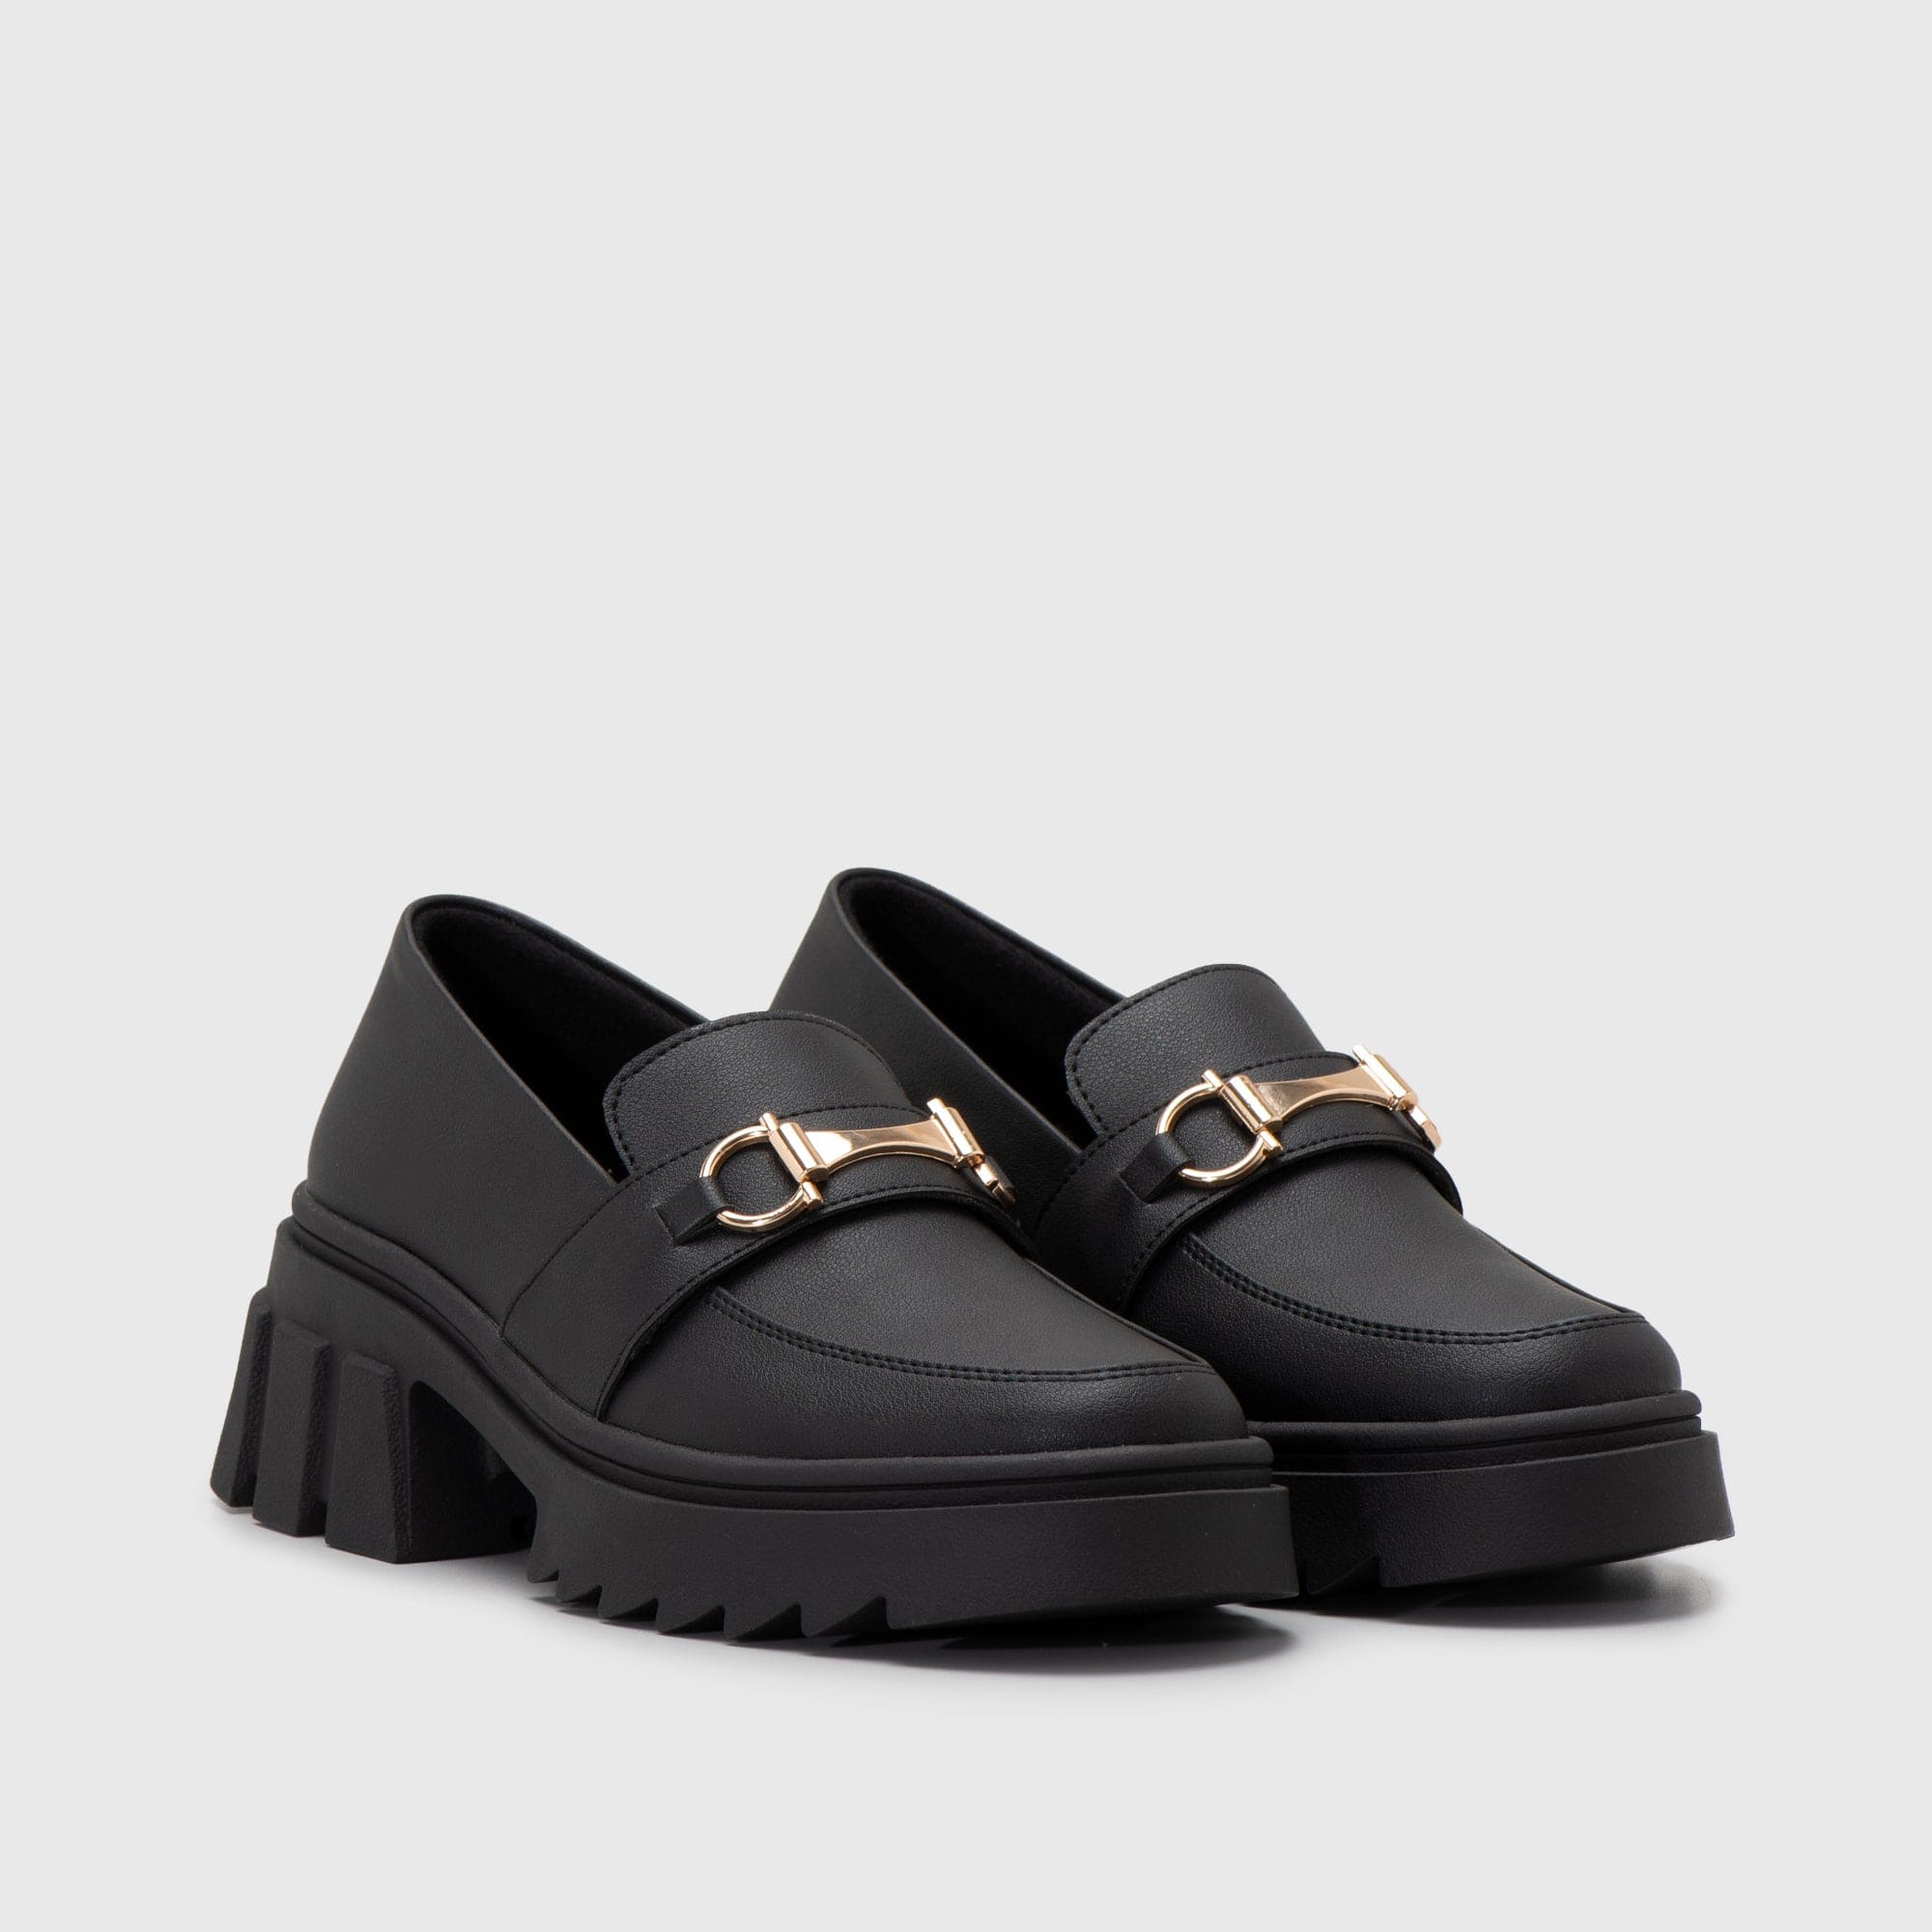 Adorable Projects Official Adorableprojects - Sillia Oxford Black - Penny Loafer